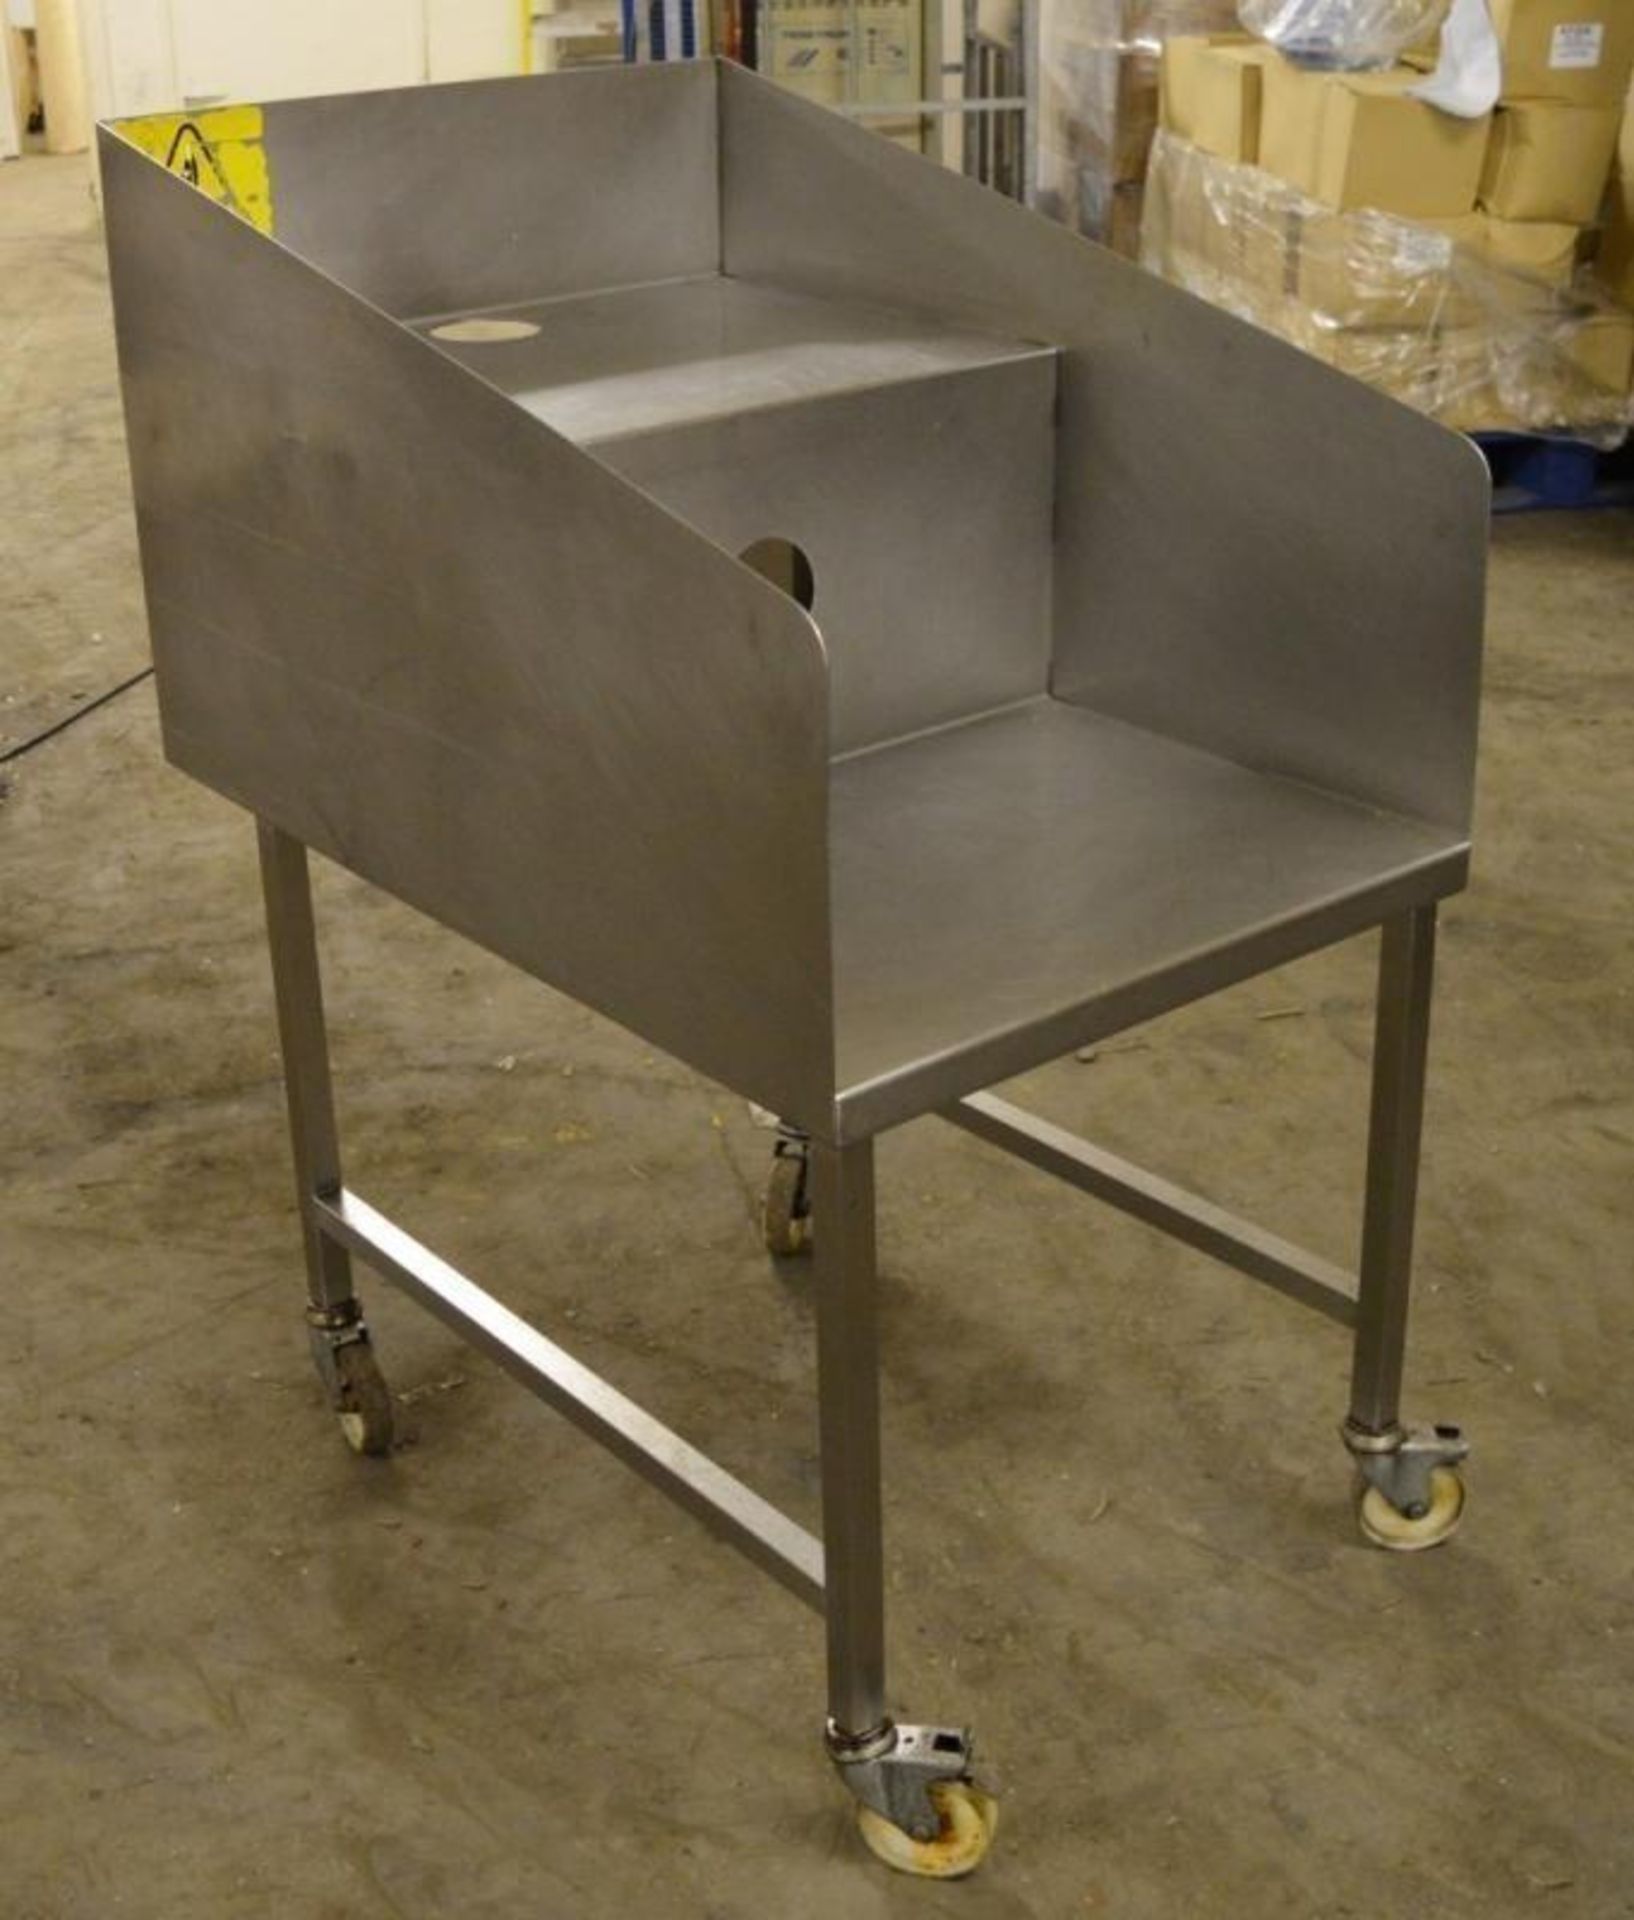 1 x Stainless Steel Commercial Waste Bench - Two Tier Waste Chute on Castors - H114 x W62.5 x D90 cm